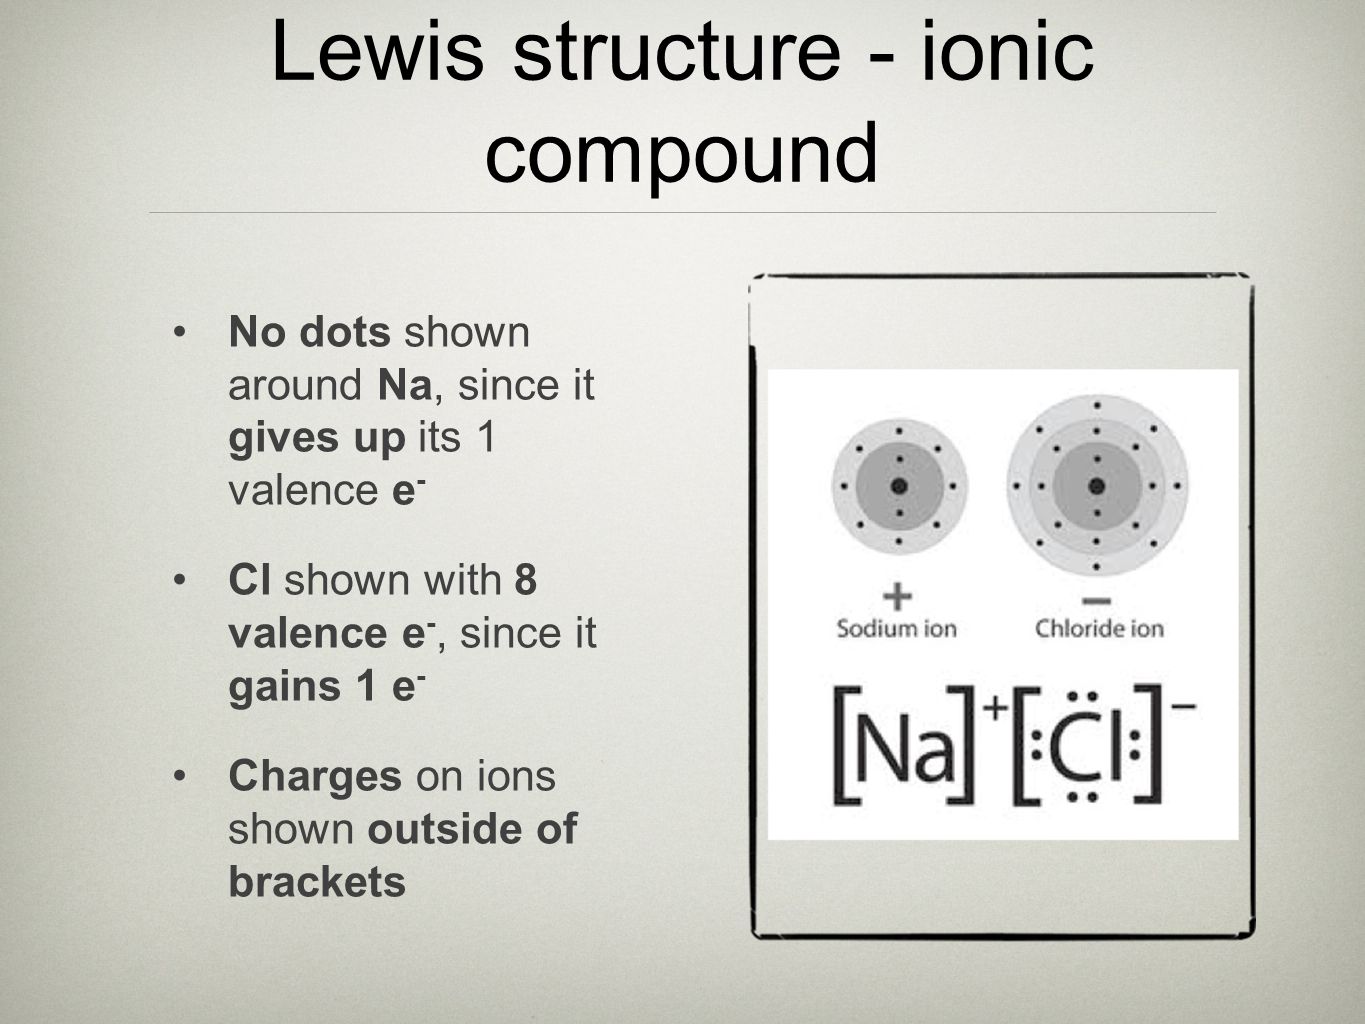 Lewis structure - ionic compound